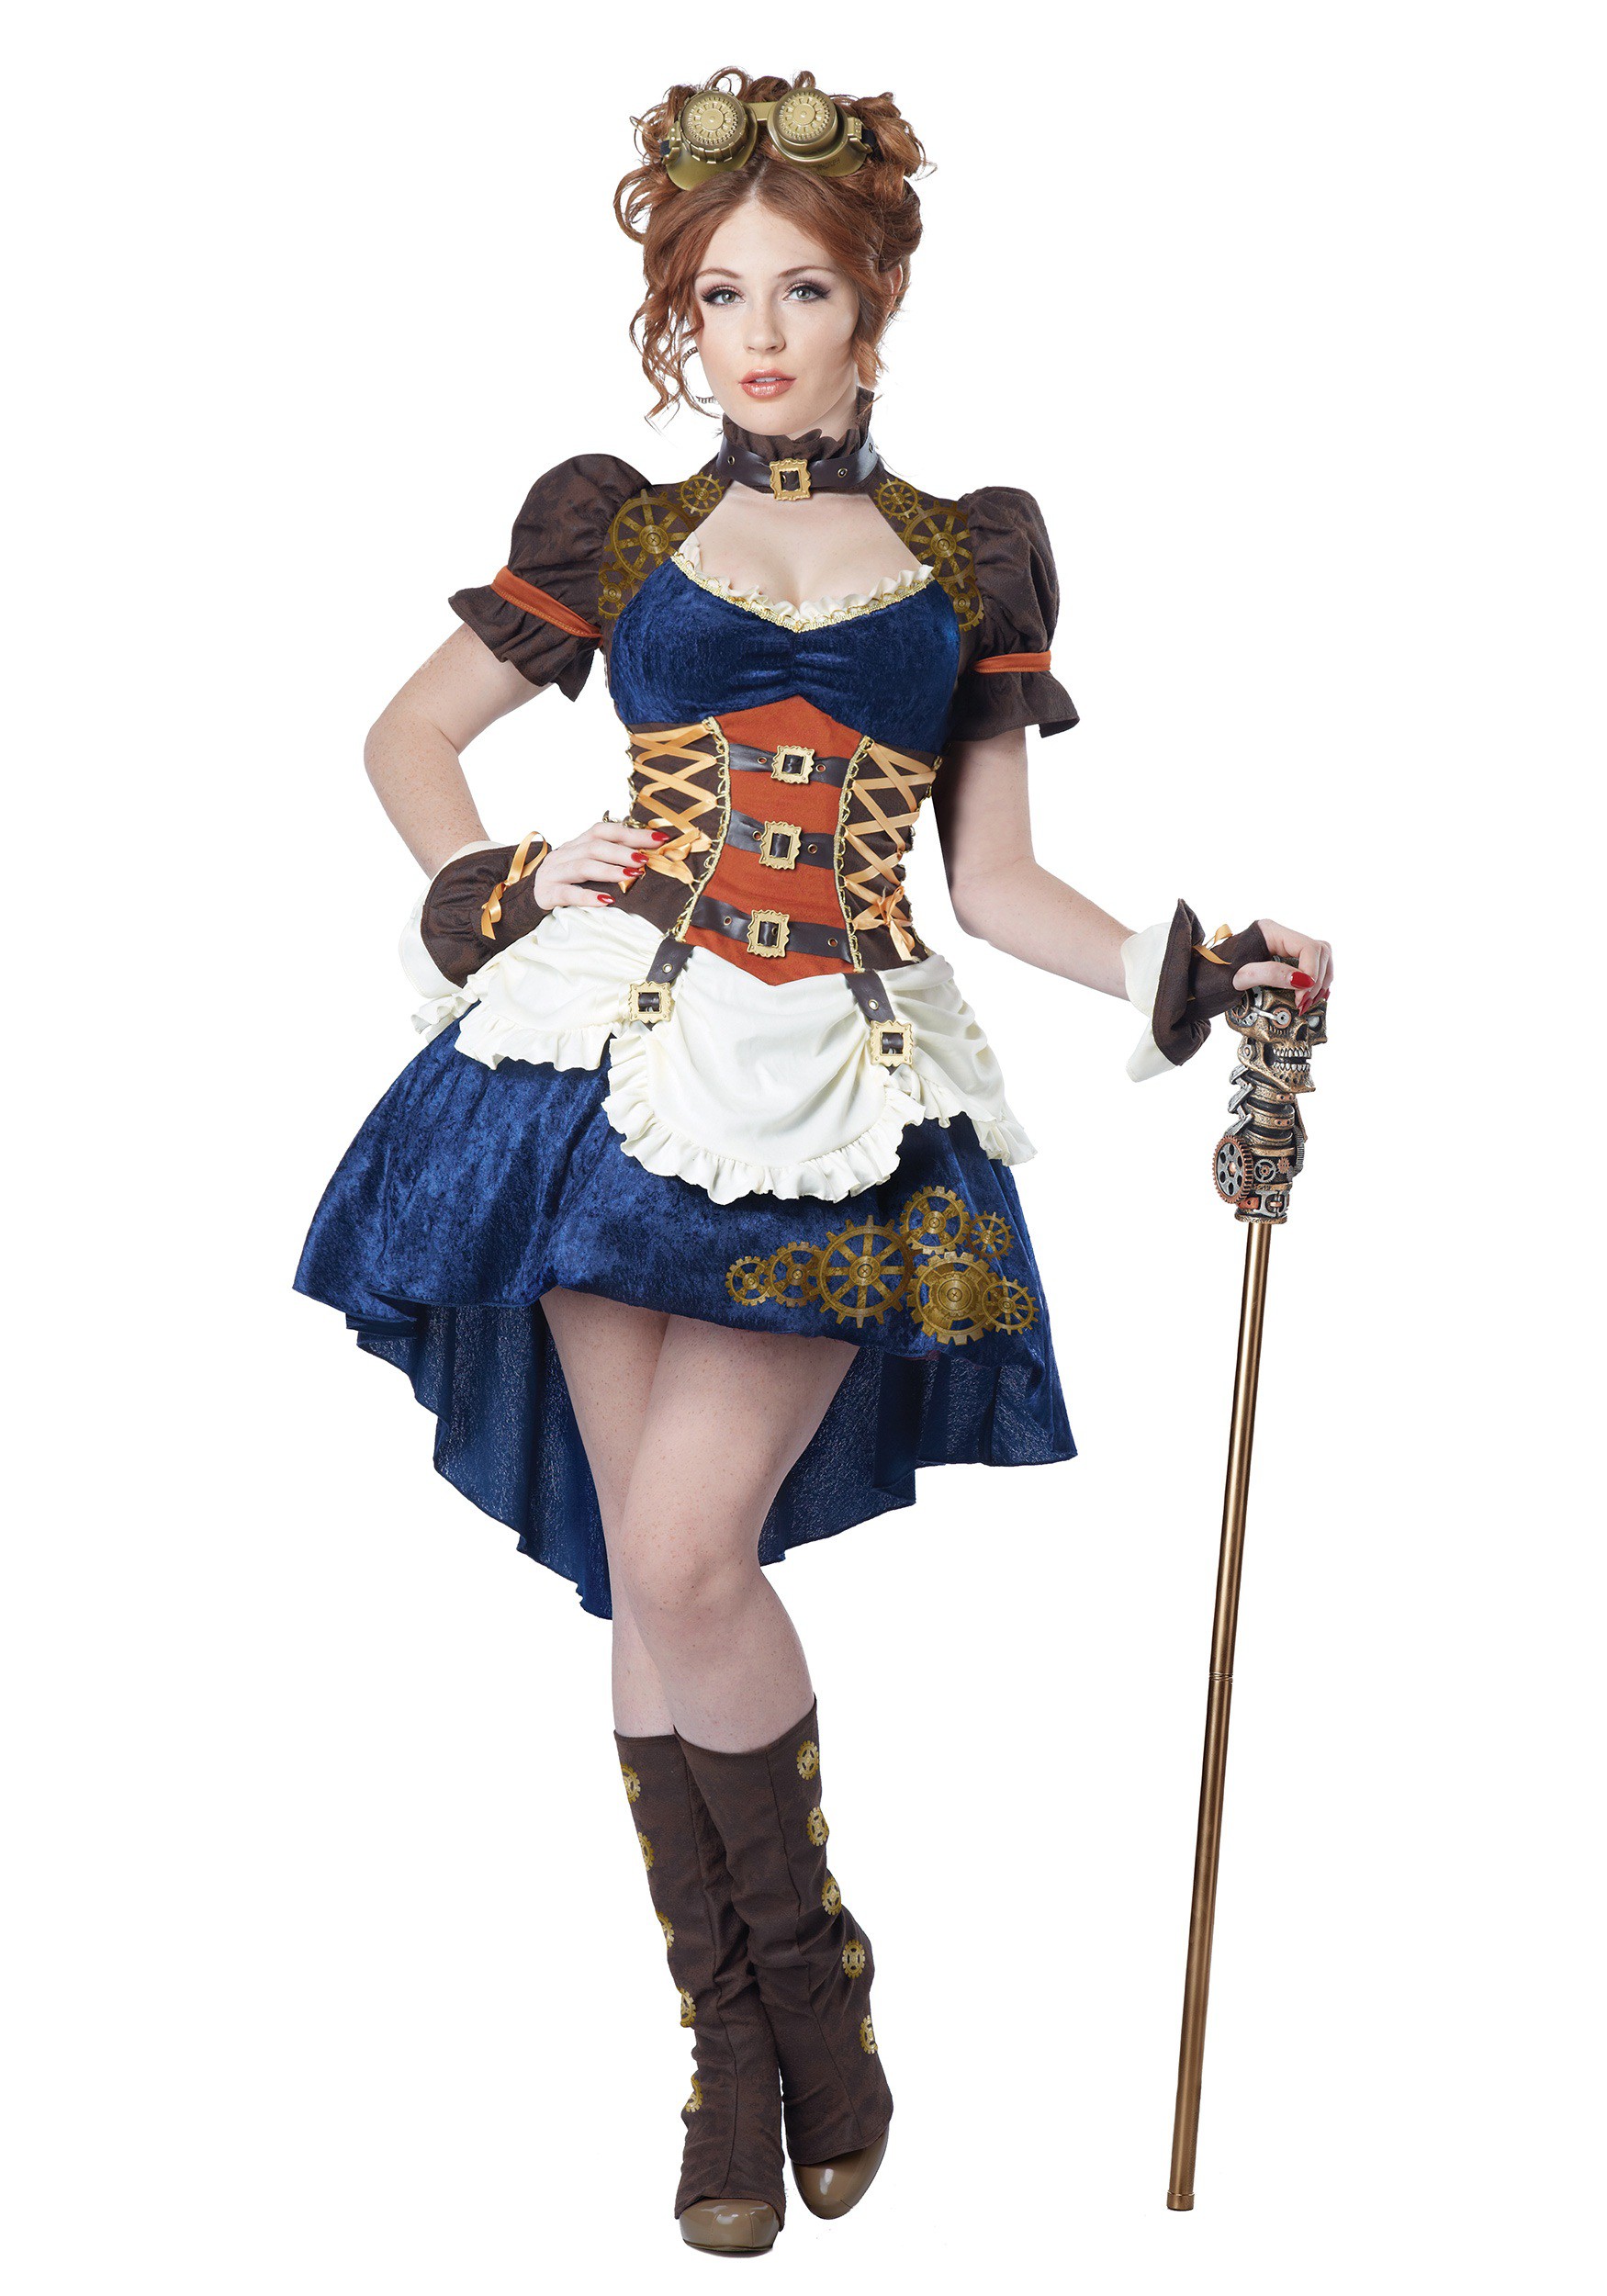 Photos - Fancy Dress California Costume Collection Steampunk Fantasy Costume for Women Brown 